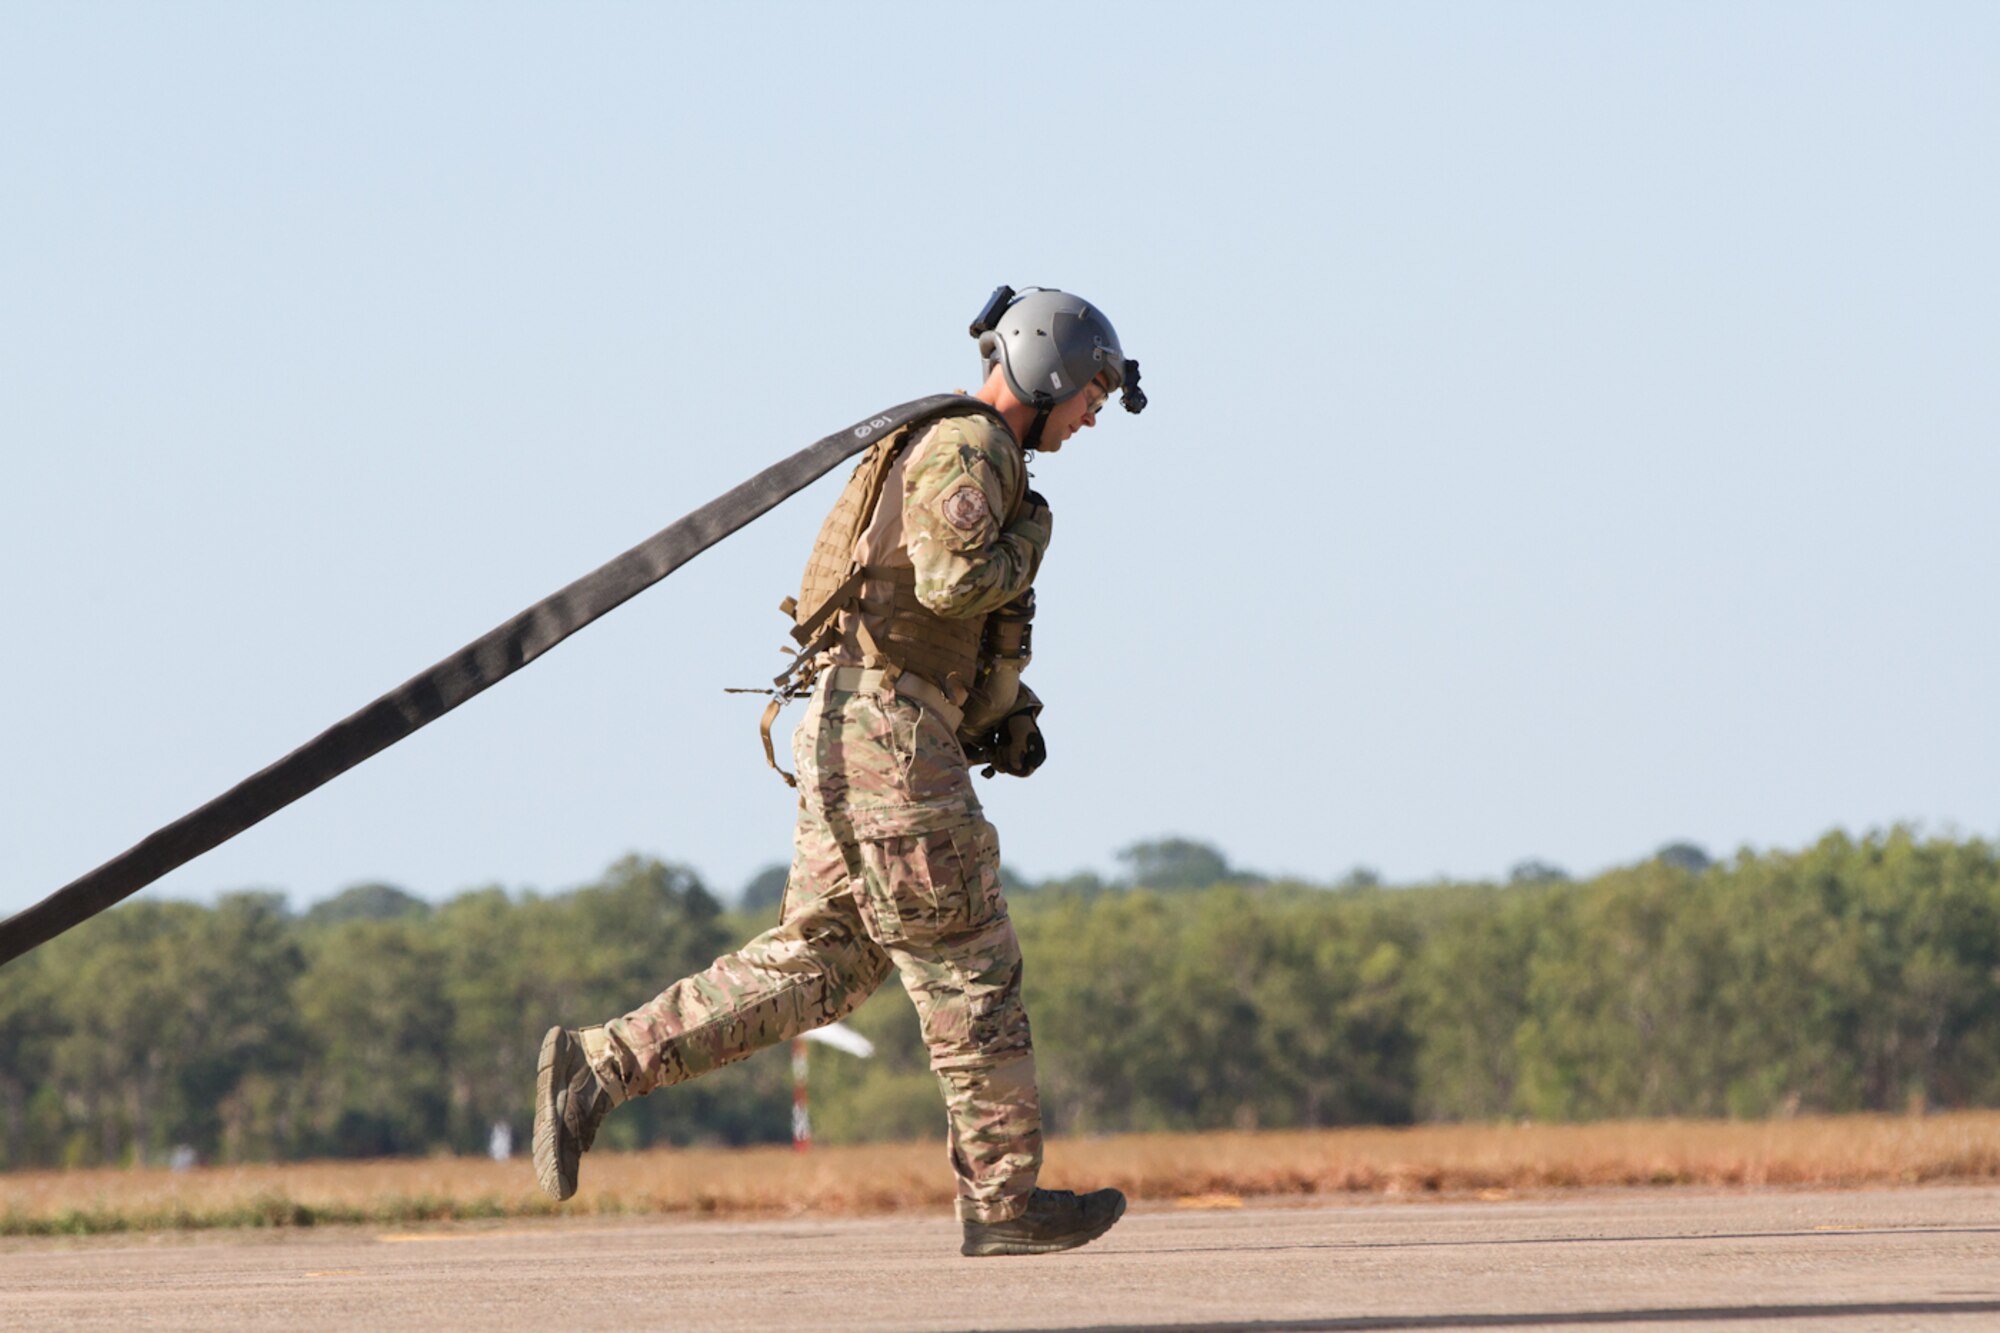 U.S. Air Force Airmen from the 18th Logistics Readiness Squadron from Kadena Air Base, Japan, partnered with the Australian army during a refueling exercise at the Royal Australian Air Force Base Darwin, July 8, 2015, in Darwin, Australia, during Talisman Sabre 2015. Talisman Sabre is a biennial exercise that provides an invaluable opportunity for nearly 30,000 U.S. and Australian defense forces to conduct operations in a combined, joint and interagency environment that will increase both countries’ ability to plan and execute a full range of operations from combat missions to humanitarian assistance efforts. (U.S. Army photo by Sgt. Steven Peterson/Released)